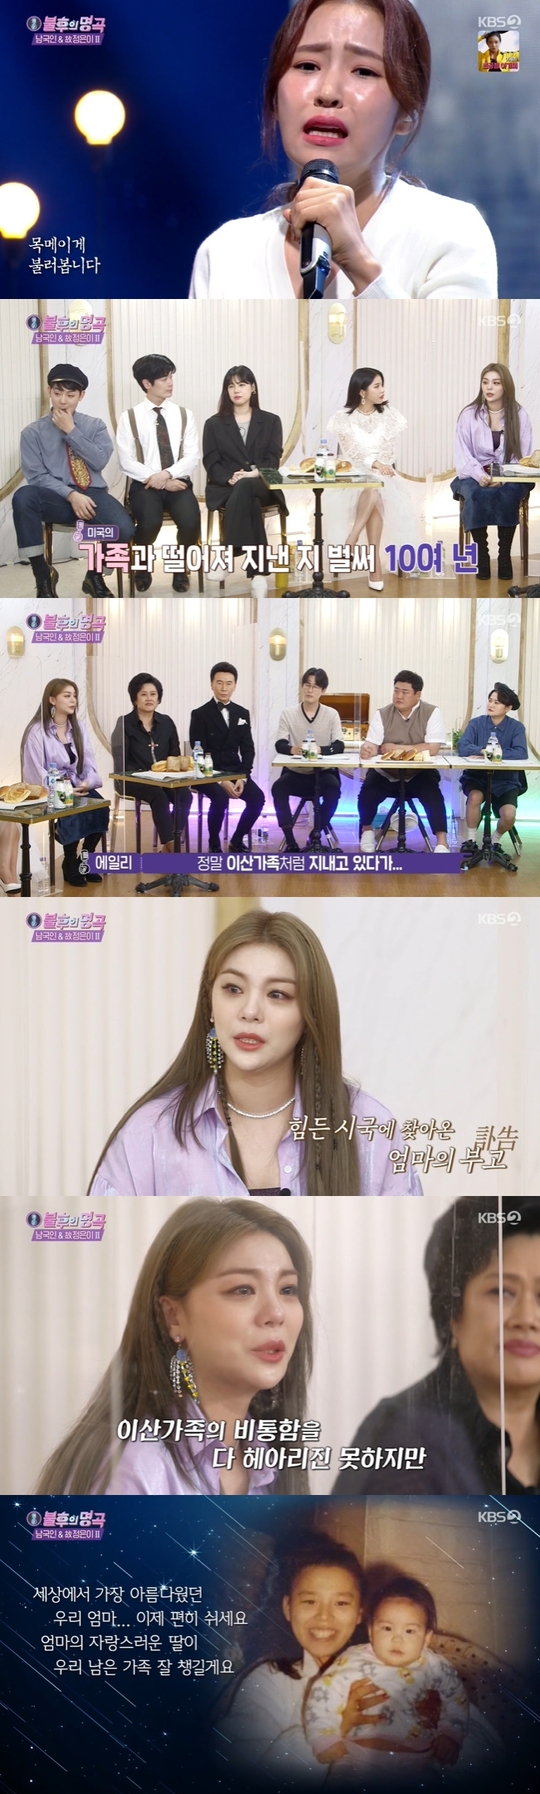 Singer Ailee recalled her parents who died on stage at Hongja, who sang the pain Now On My Way to Meet You You.On KBS 2TV Immortal Songs: Singing the Legend broadcast on October 2, Ailee told her about the pain of losing her family.On this day, Hongja sang Seol Undos Lost 30 Years, which was the theme song Now On My Way to Meet You You in 1983 in the first order of the second part.I want to show you how I really dress for my color this time, and Ive been careful about arrangements and compositions, and I want to show you one time after winning the championship, Hongja said.Hongja was touched by the stage with bare feet to show the unexpressable emptyness in the words Now On My Way to Meet You You, who lost both his family and his years.The waiting room that saw the stage became a tearful sea. Gangjin shed tears saying, I want to see our Mother. Jinseong also said, I keep thinking about my childhood.When I was three years old, I broke up with my parents and knew that my parents were not there next to me when I was seven or eight years old.I hope that there will be no such pain again when I see such a screen. Ailee, who shed a lot of tears, said, I have been separated from my family in the United States for more than 10 years while living in Singapore.I worked hard in Korea and I was busy so I did not visit often.  I was almost like Now On My Way to Meet You, and A Year Ago in Winter and both my parents died earlier this year.It comes to me in a slightly different sense, he confessed.